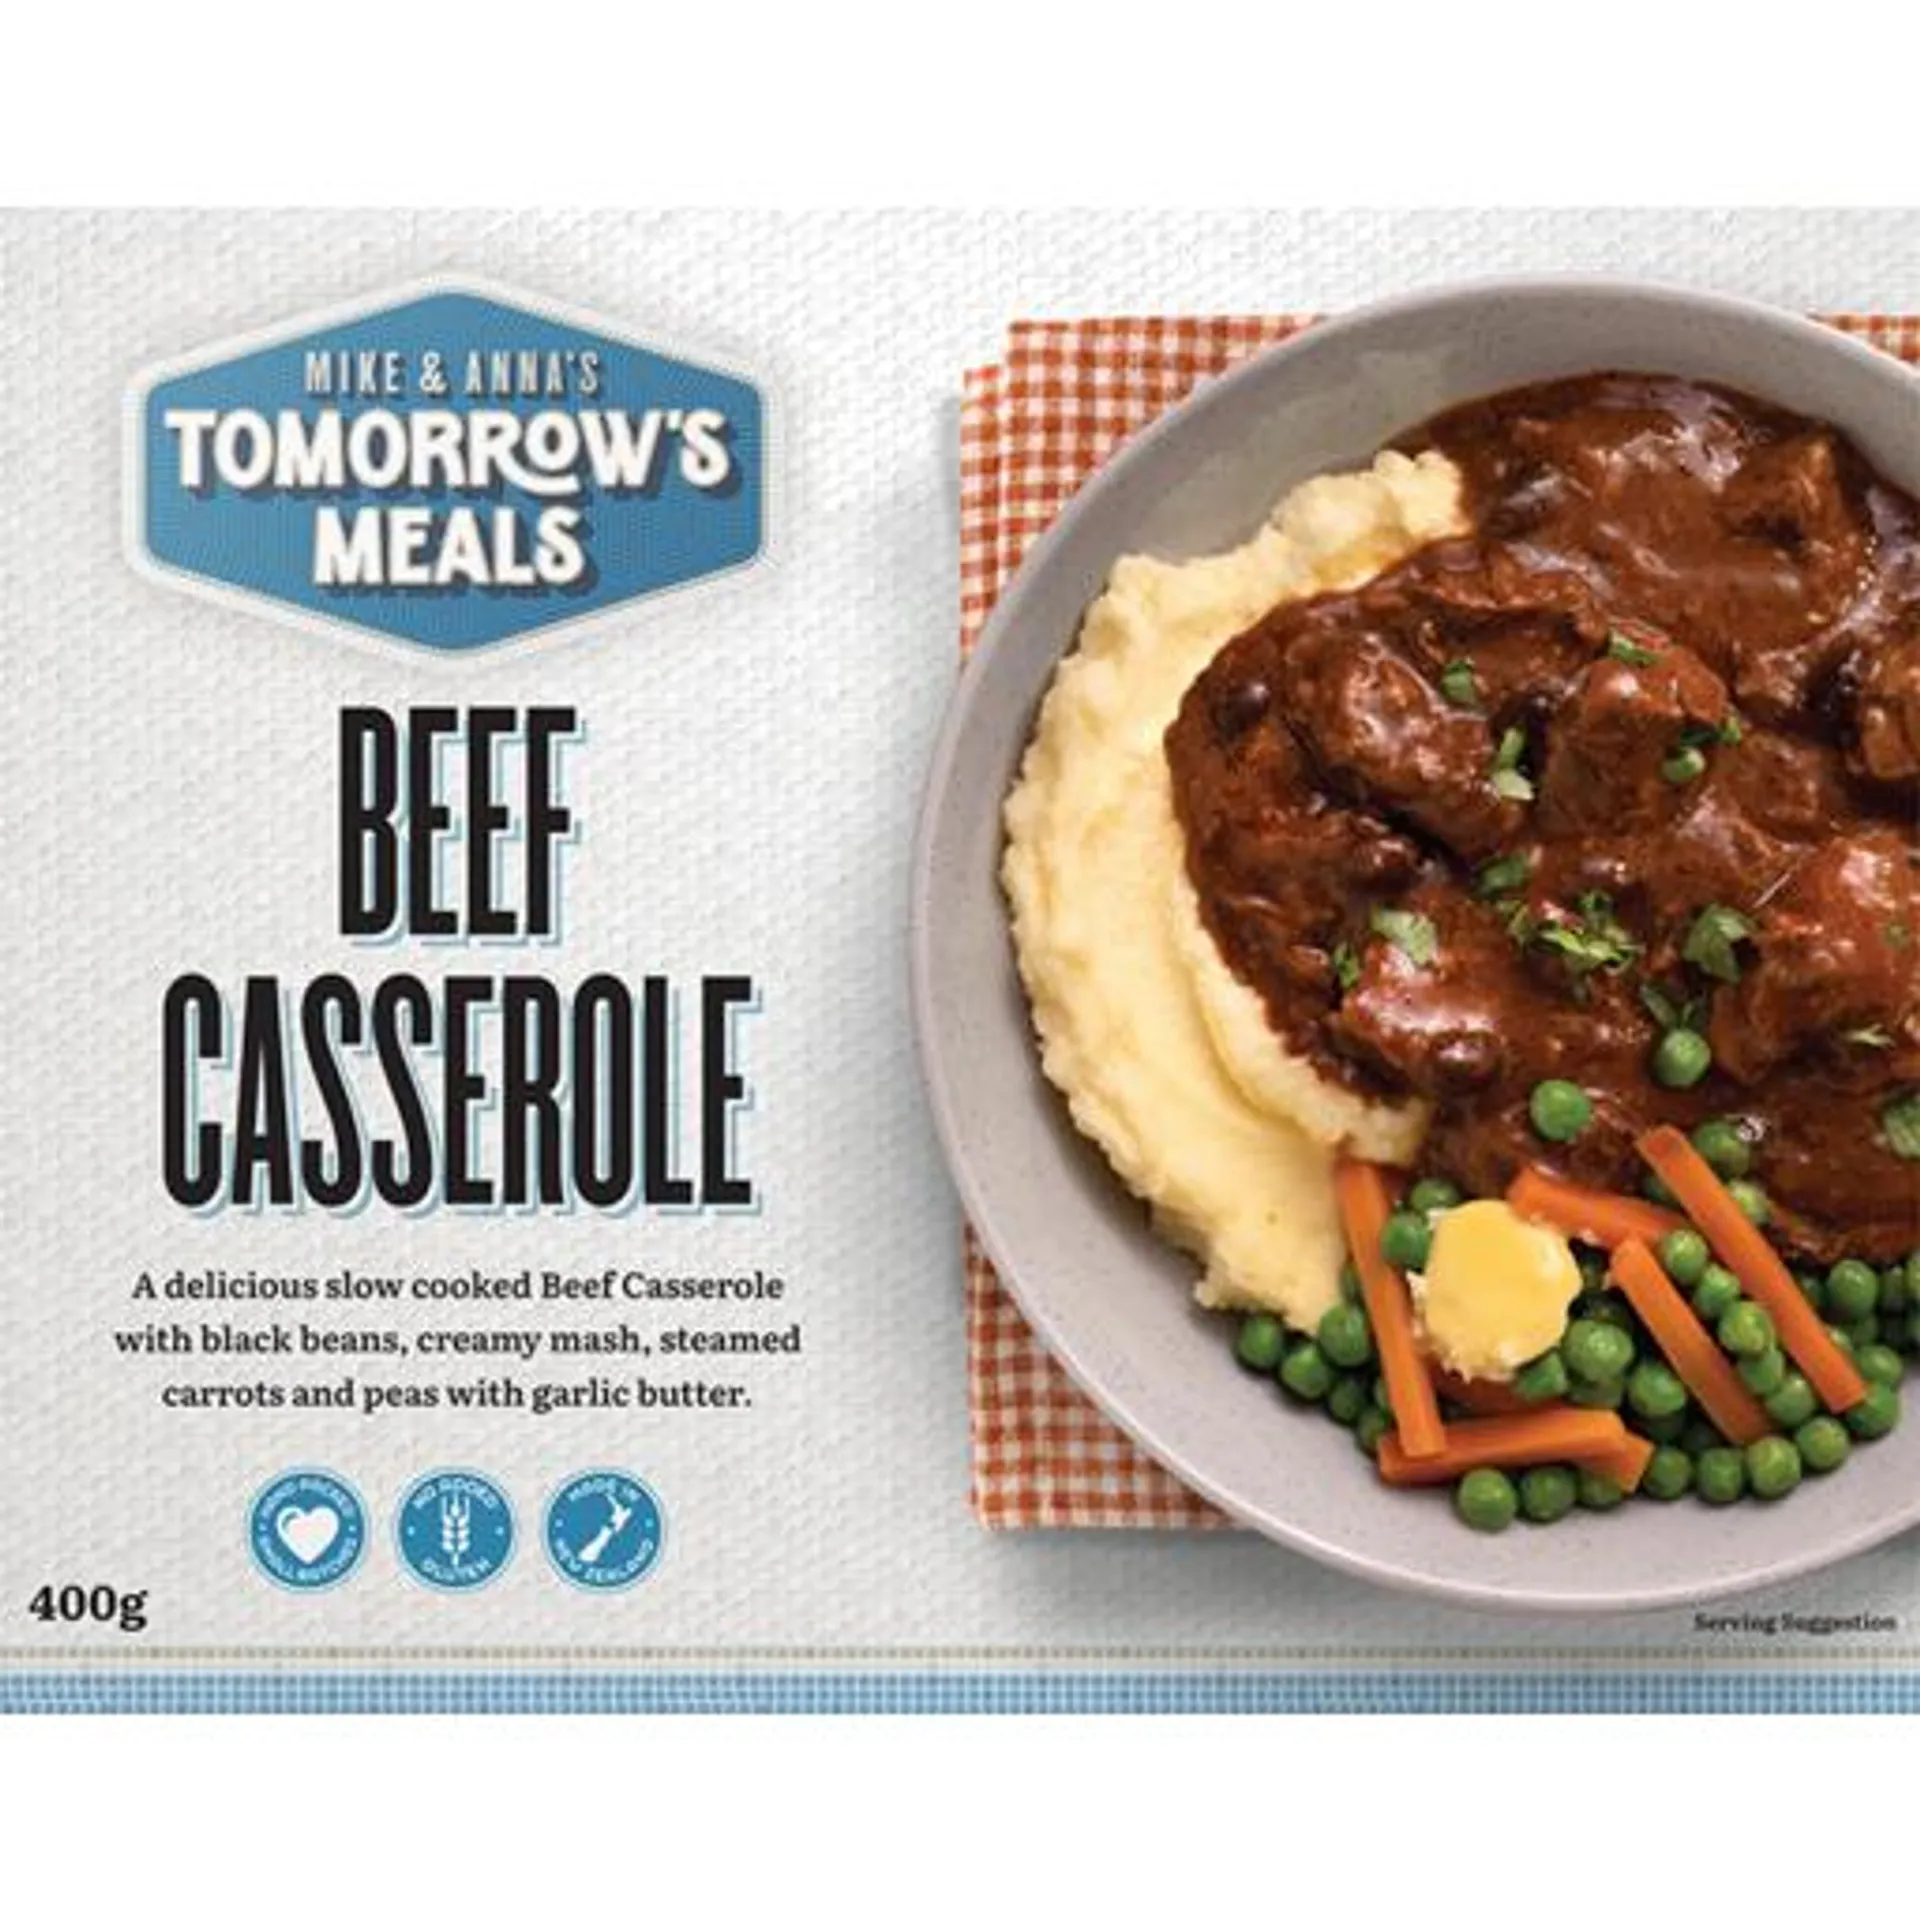 Tomorrow's Meals Slow Cooked Beef Casserole 400g